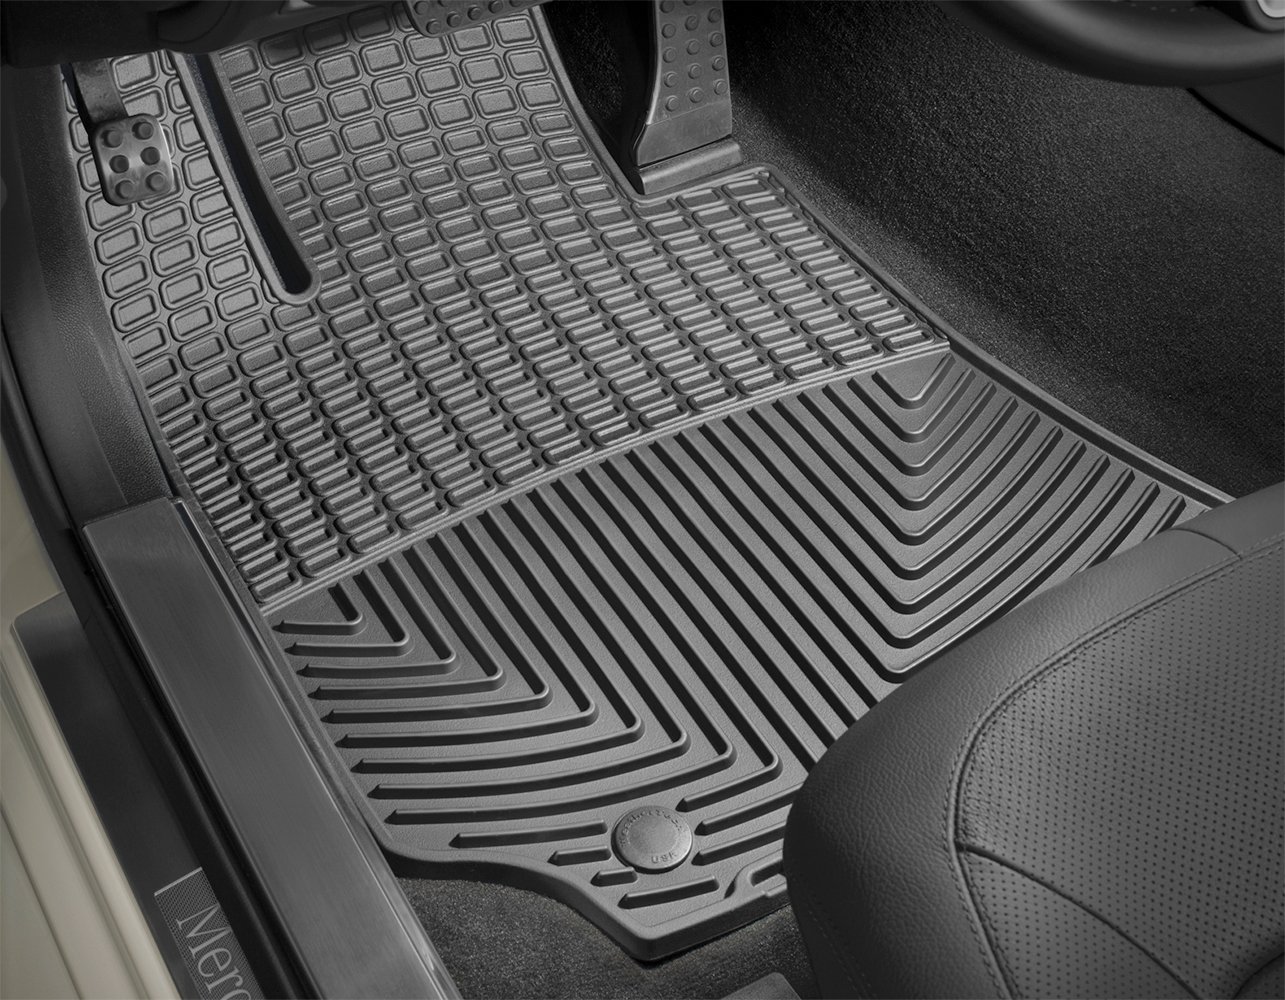 WeatherTech Home Mats  Weather tech, Home business, Home accessories